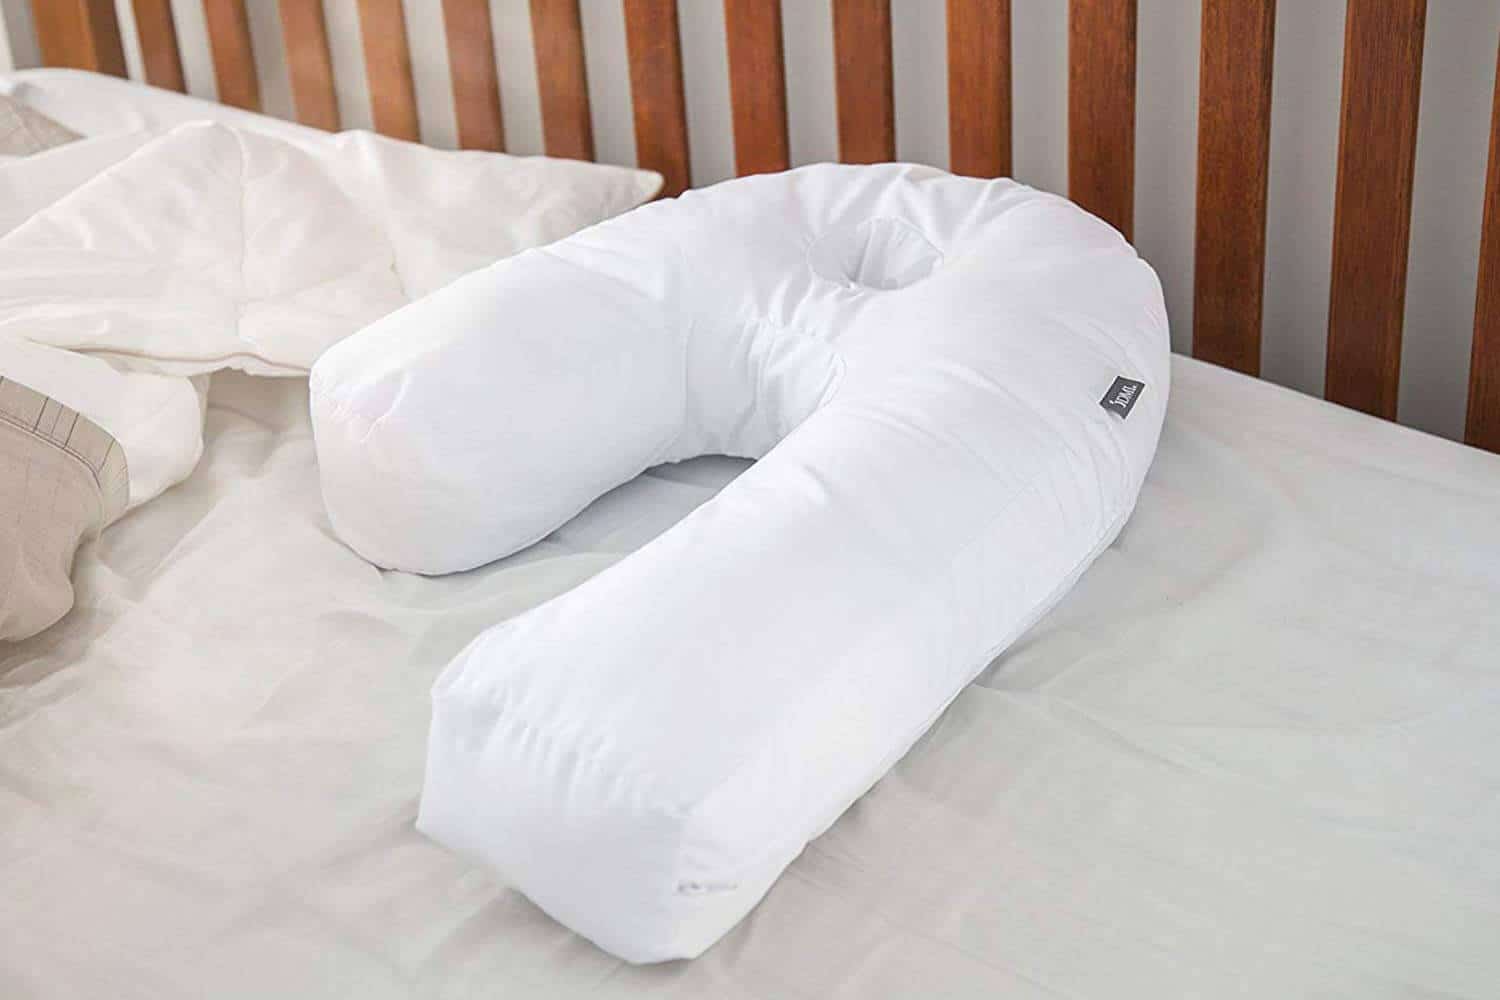 Best Pillow with Ear Hole in the Middle for Ear Pain